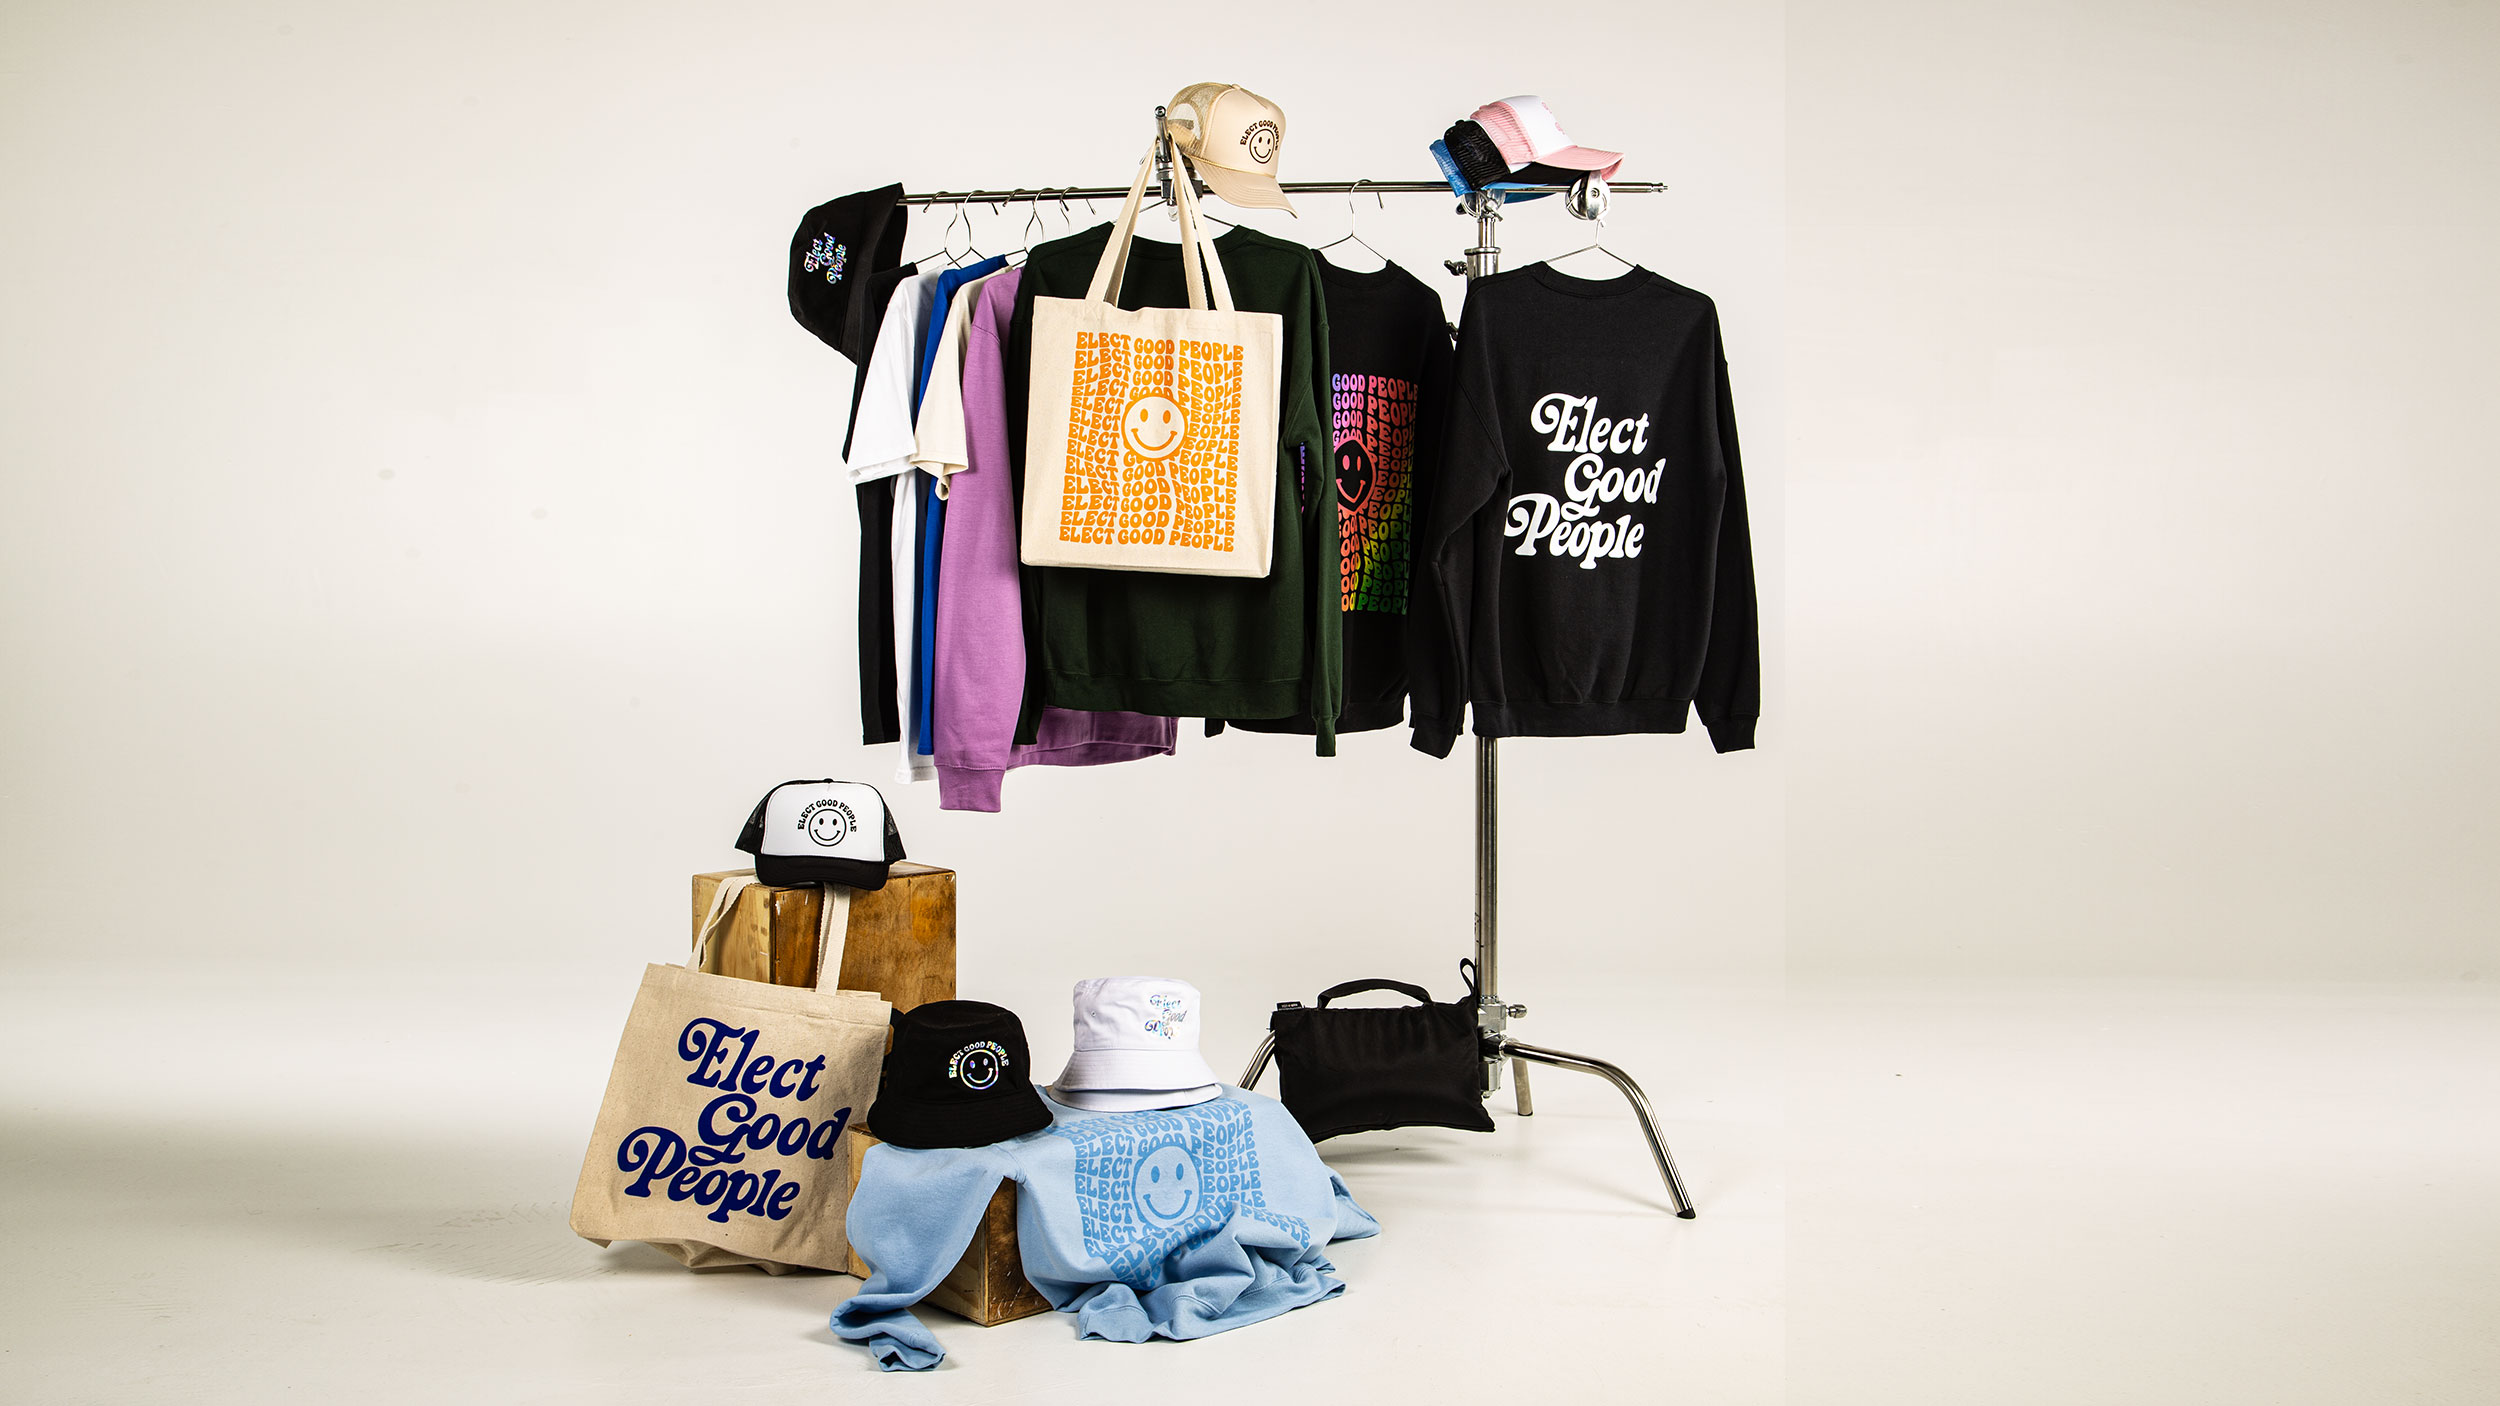 Product shot of Elect Good People merchandise including tote bags, hats, sweatshirts, and T-shirts. 